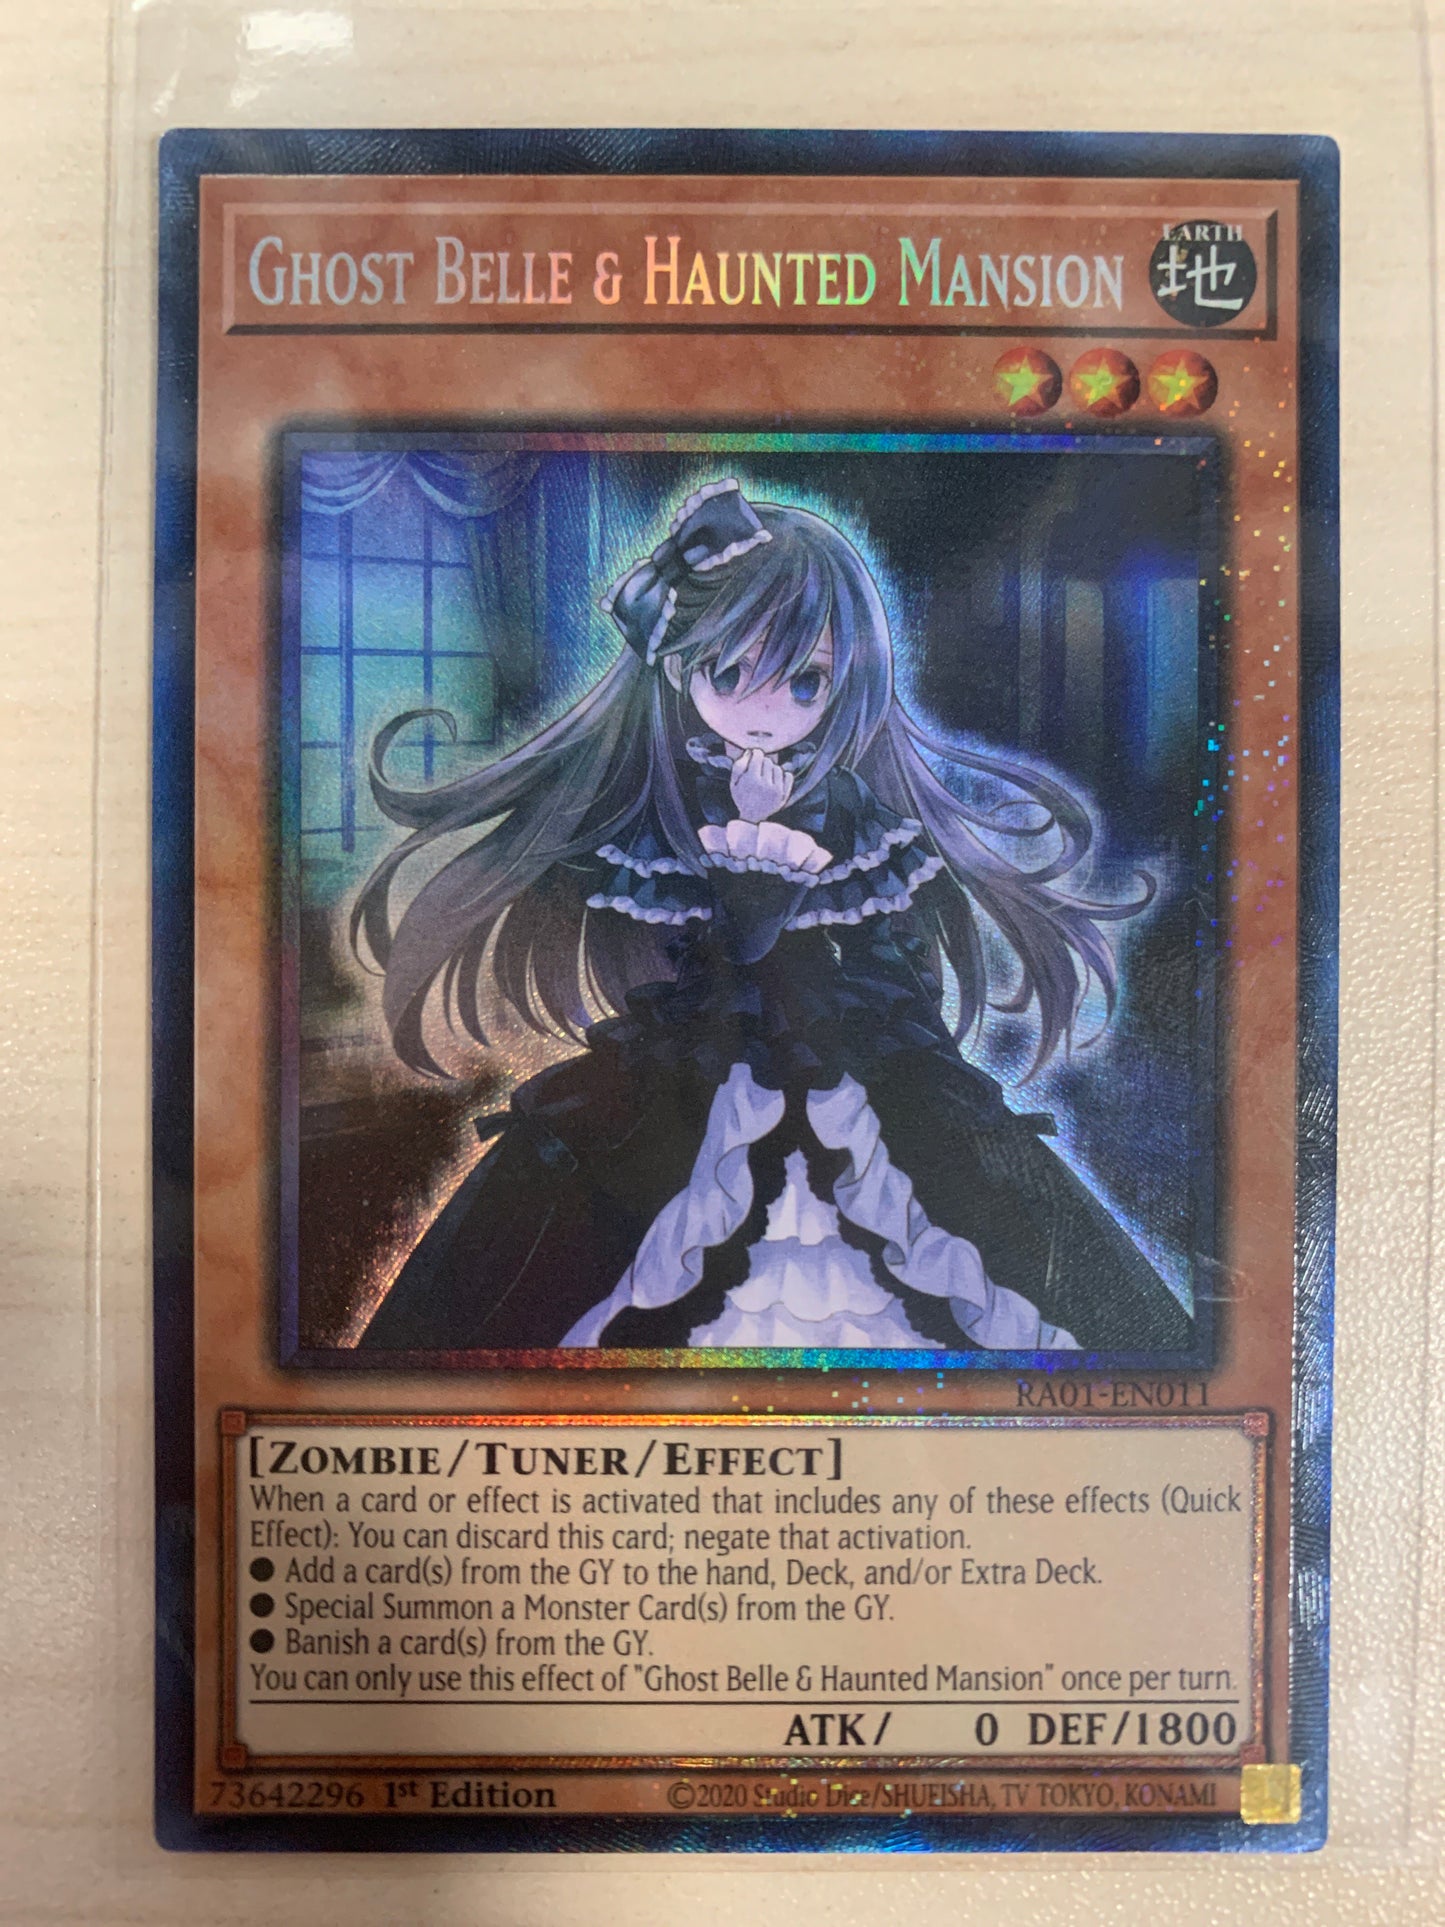 Ghost Belle & Haunted Mansion (P-CR)